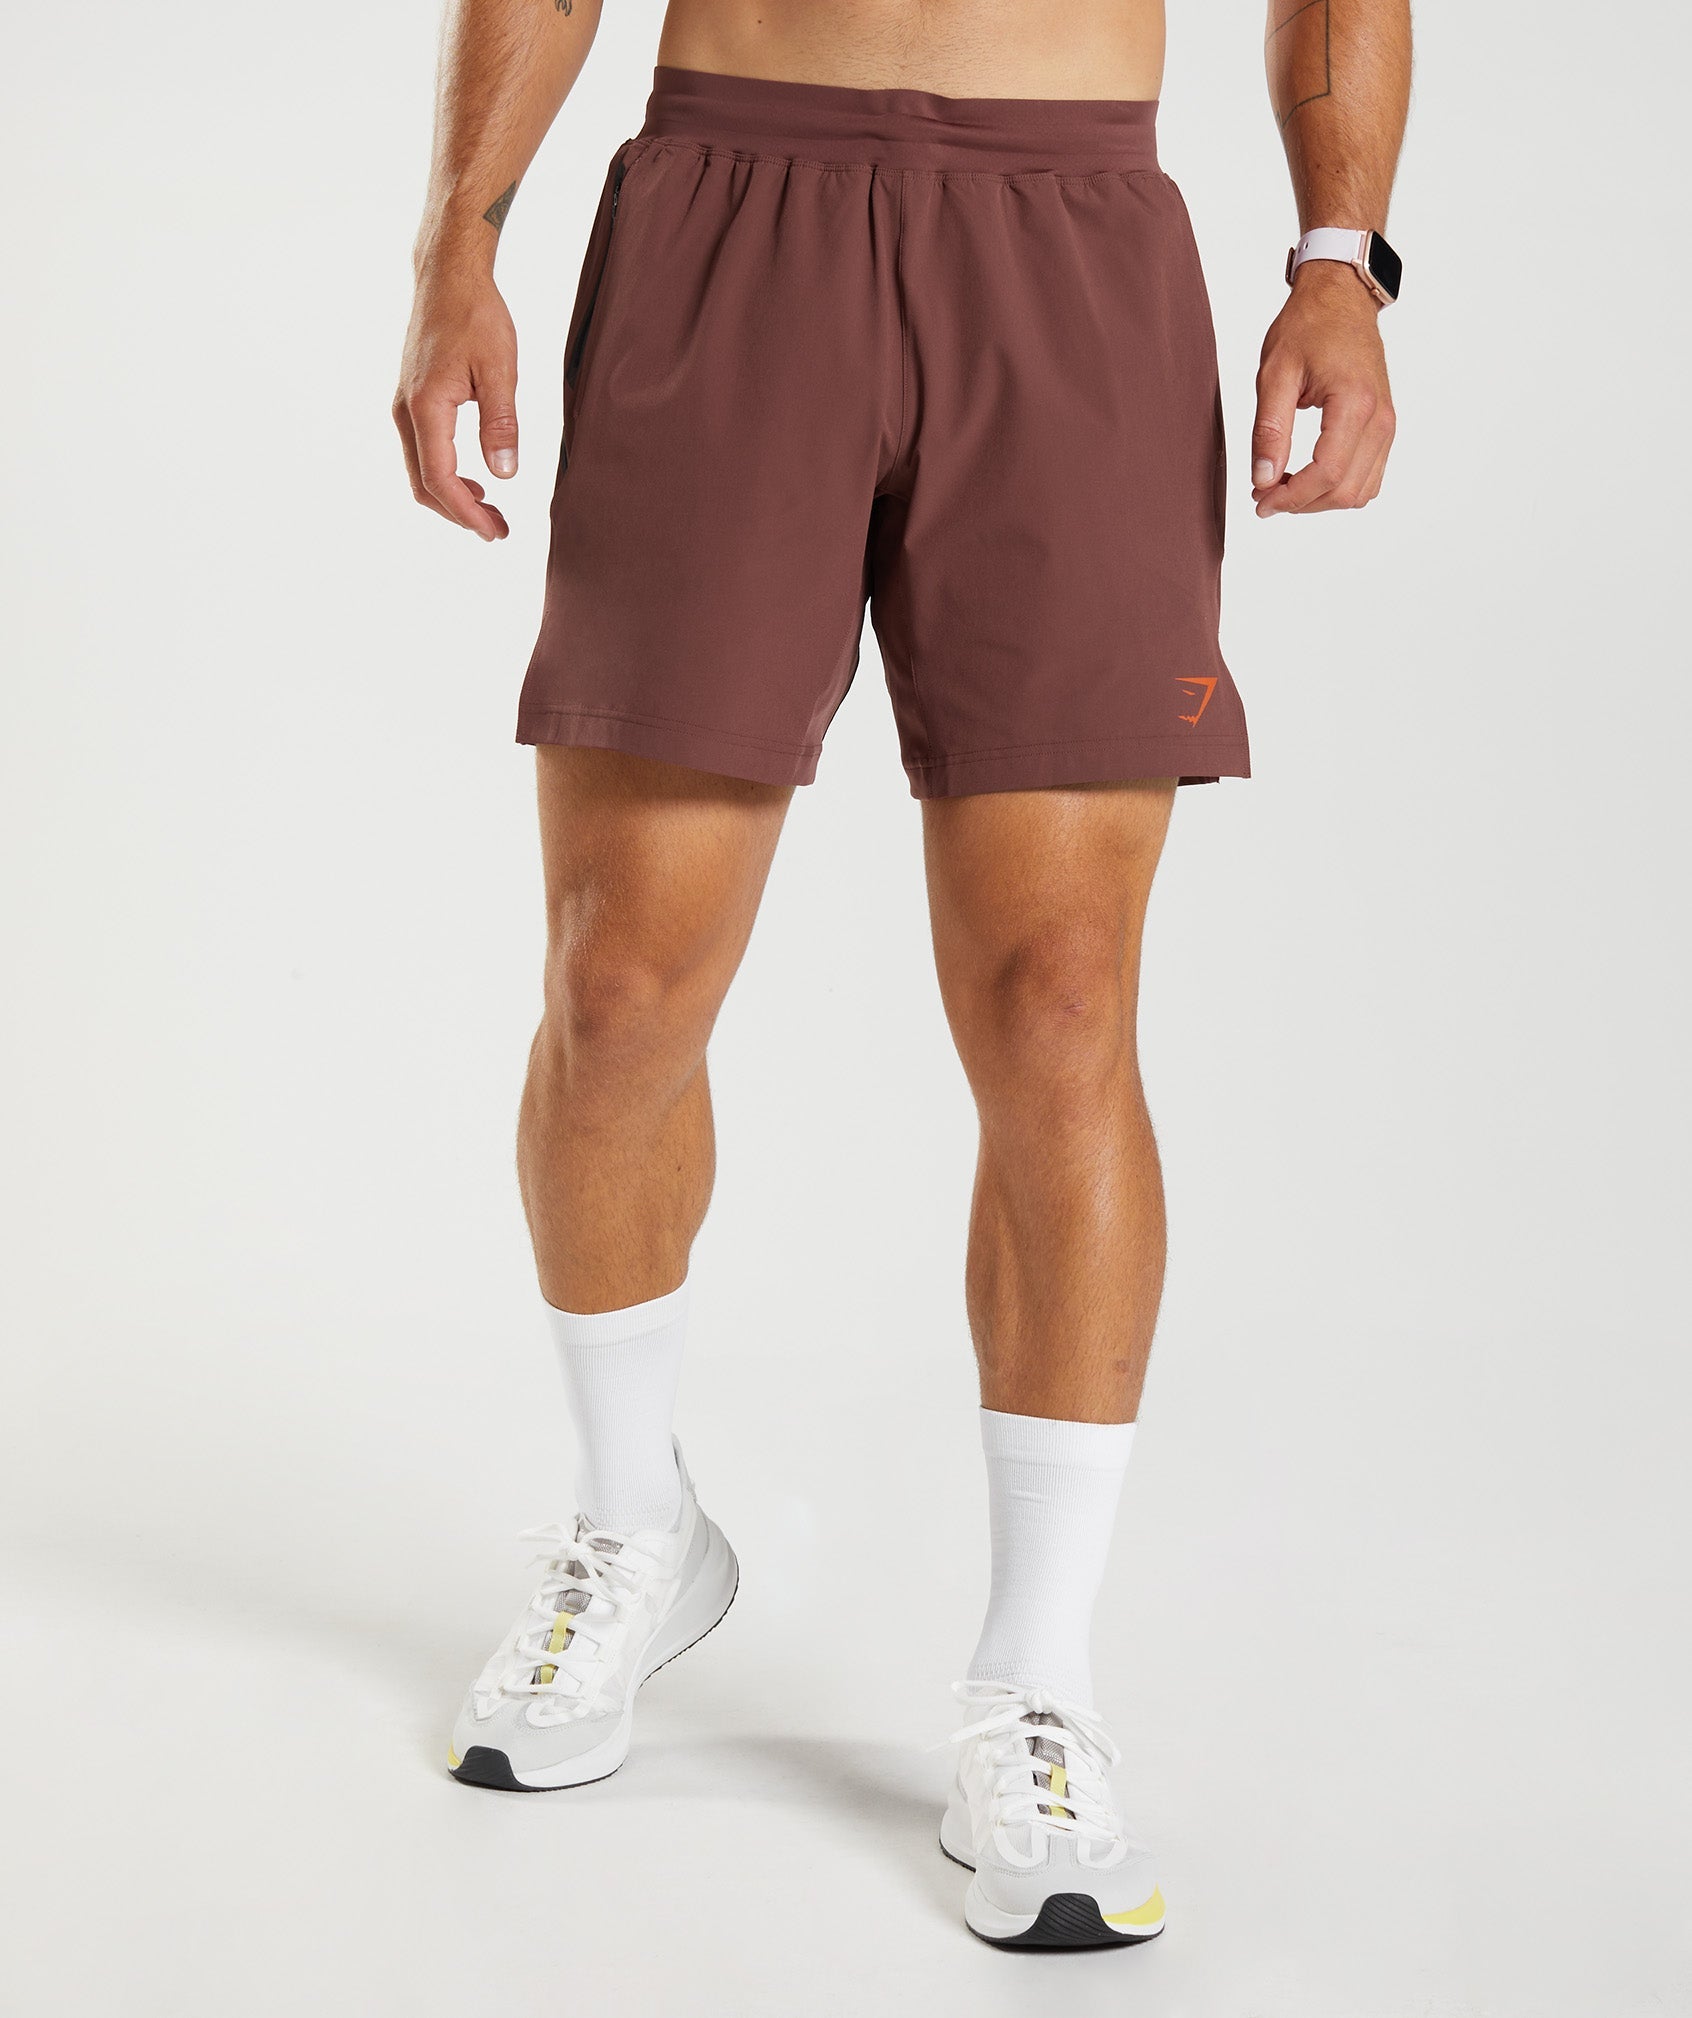 Apex 8" Function Shorts in Cherry Brown